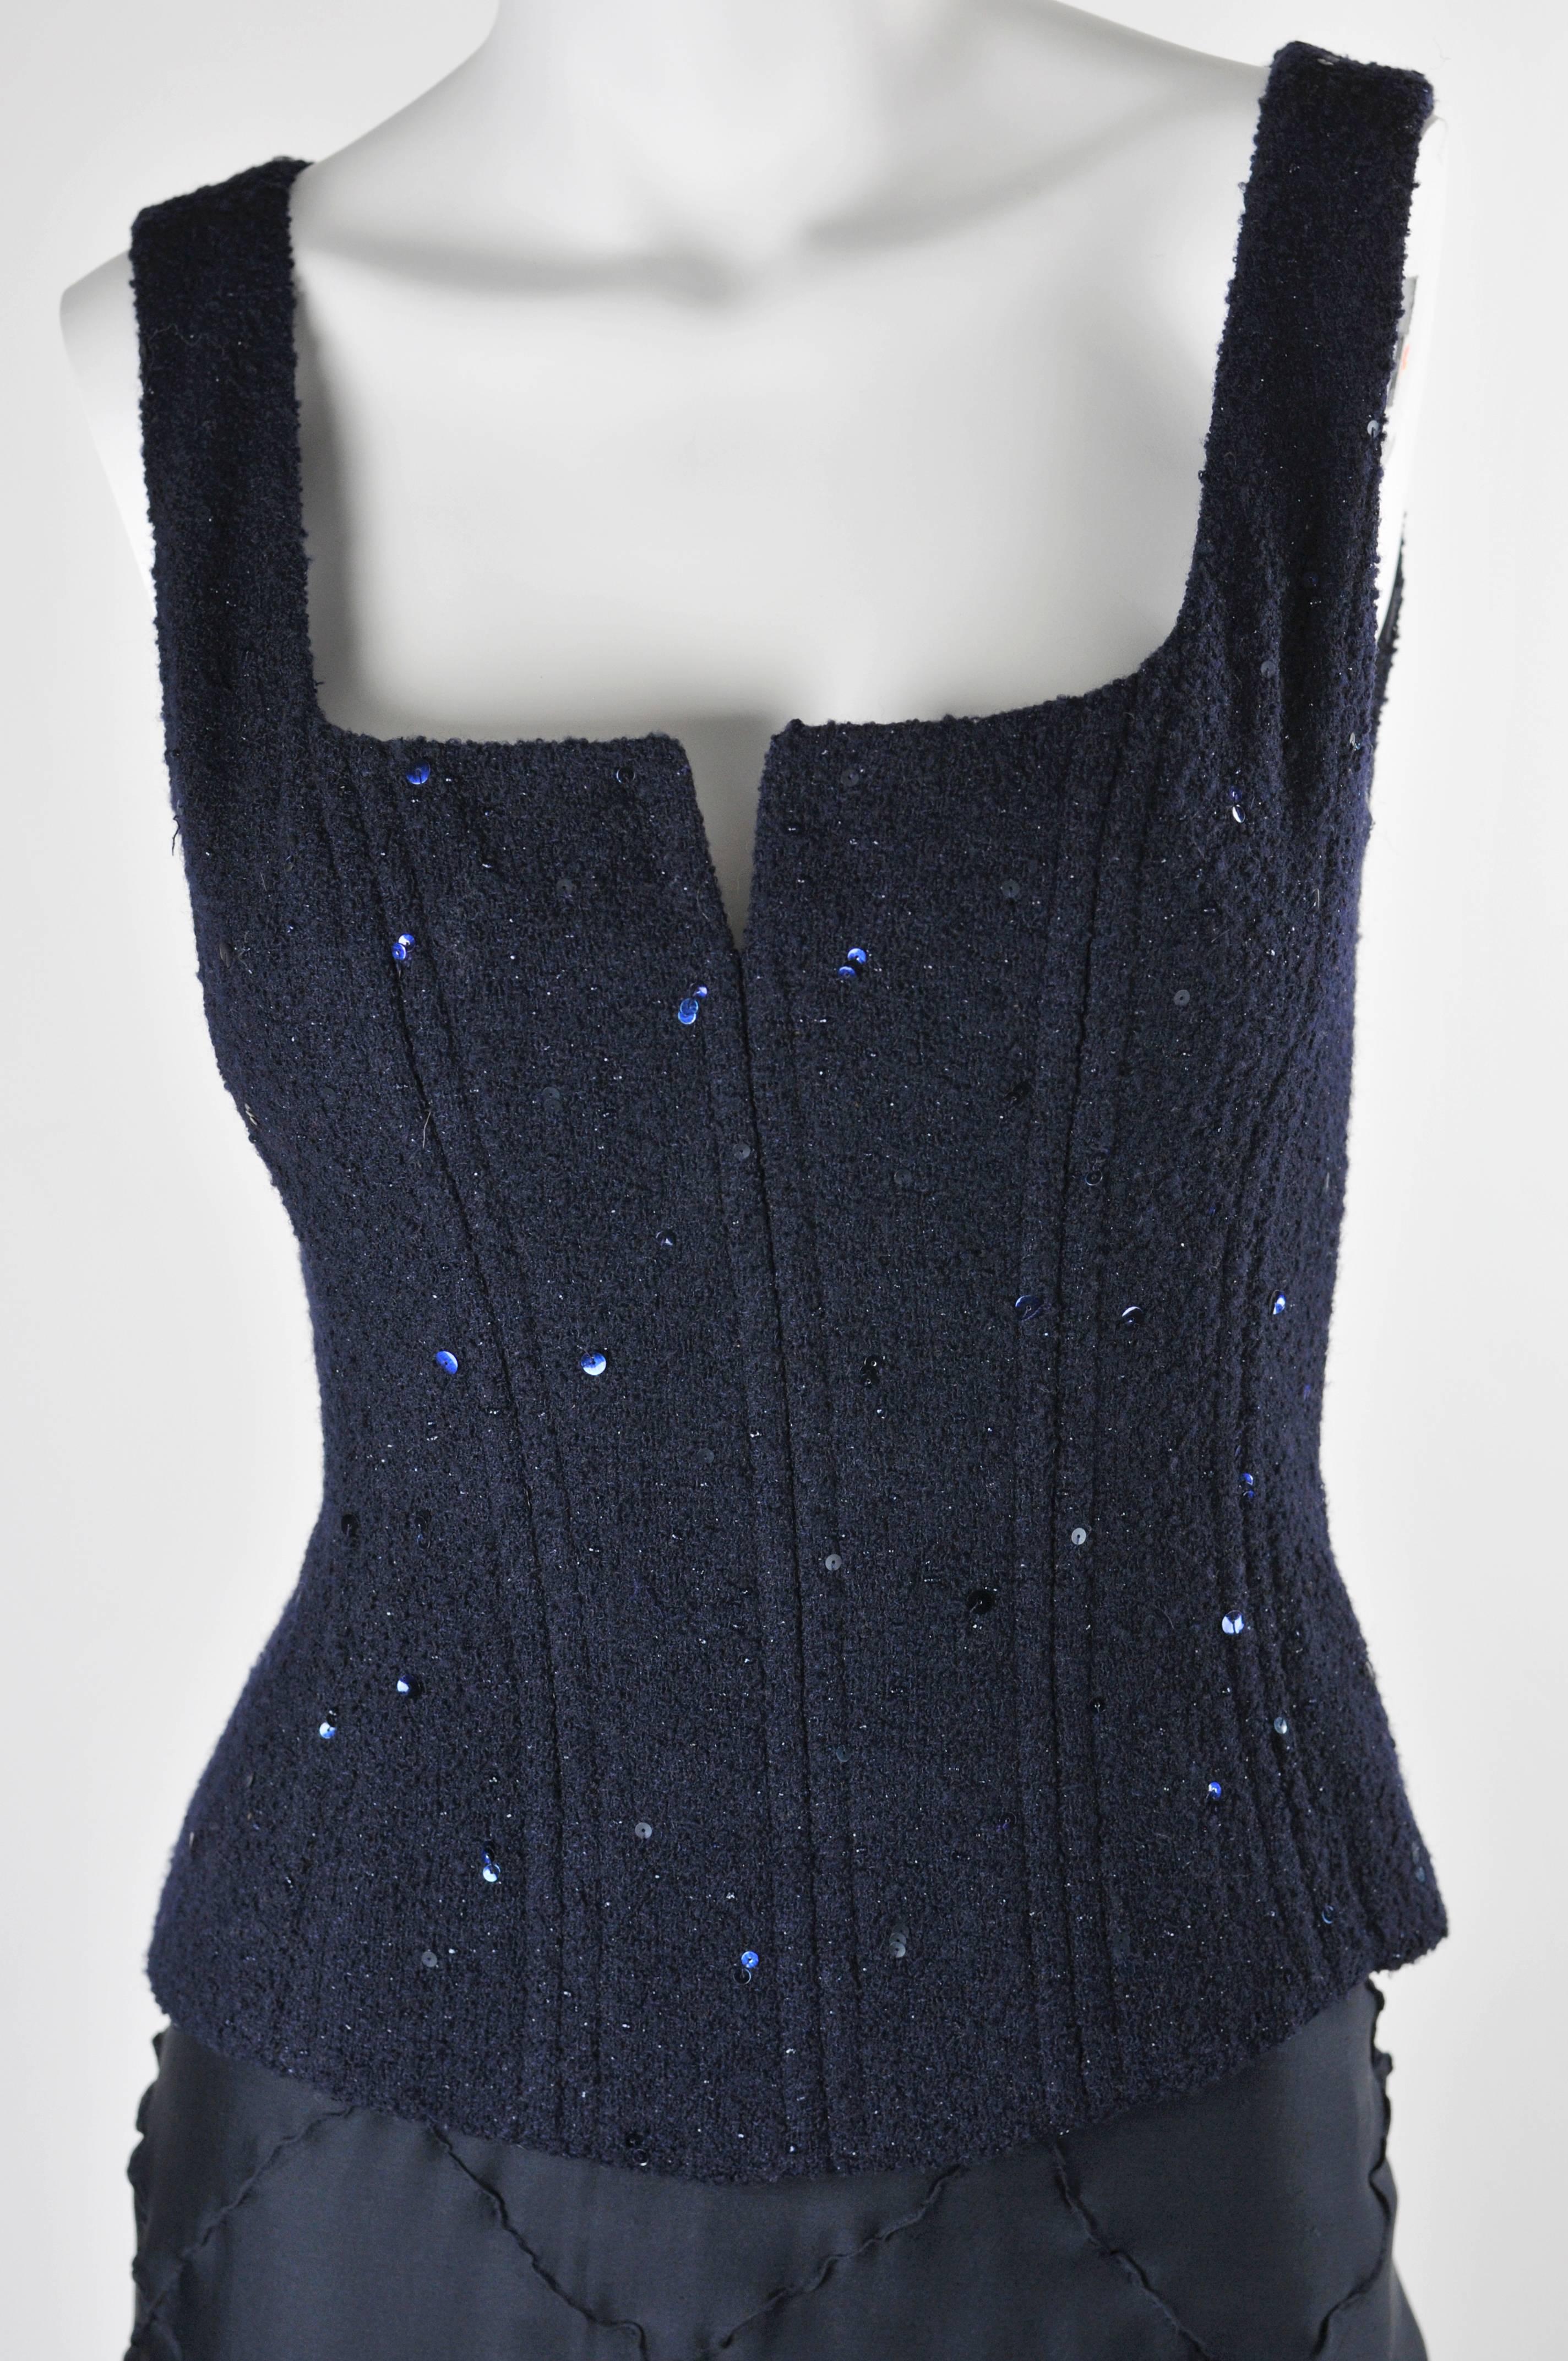 Classic Chanel Boutique Bustier with 9 double (18) vertical bones with additional inner structure of two horizontal ribbons. Fabric 90% wool and 10 % nylon and overall navy sequins with 100% silk lining. FR 36. The best ever Chanel bustier. Paired